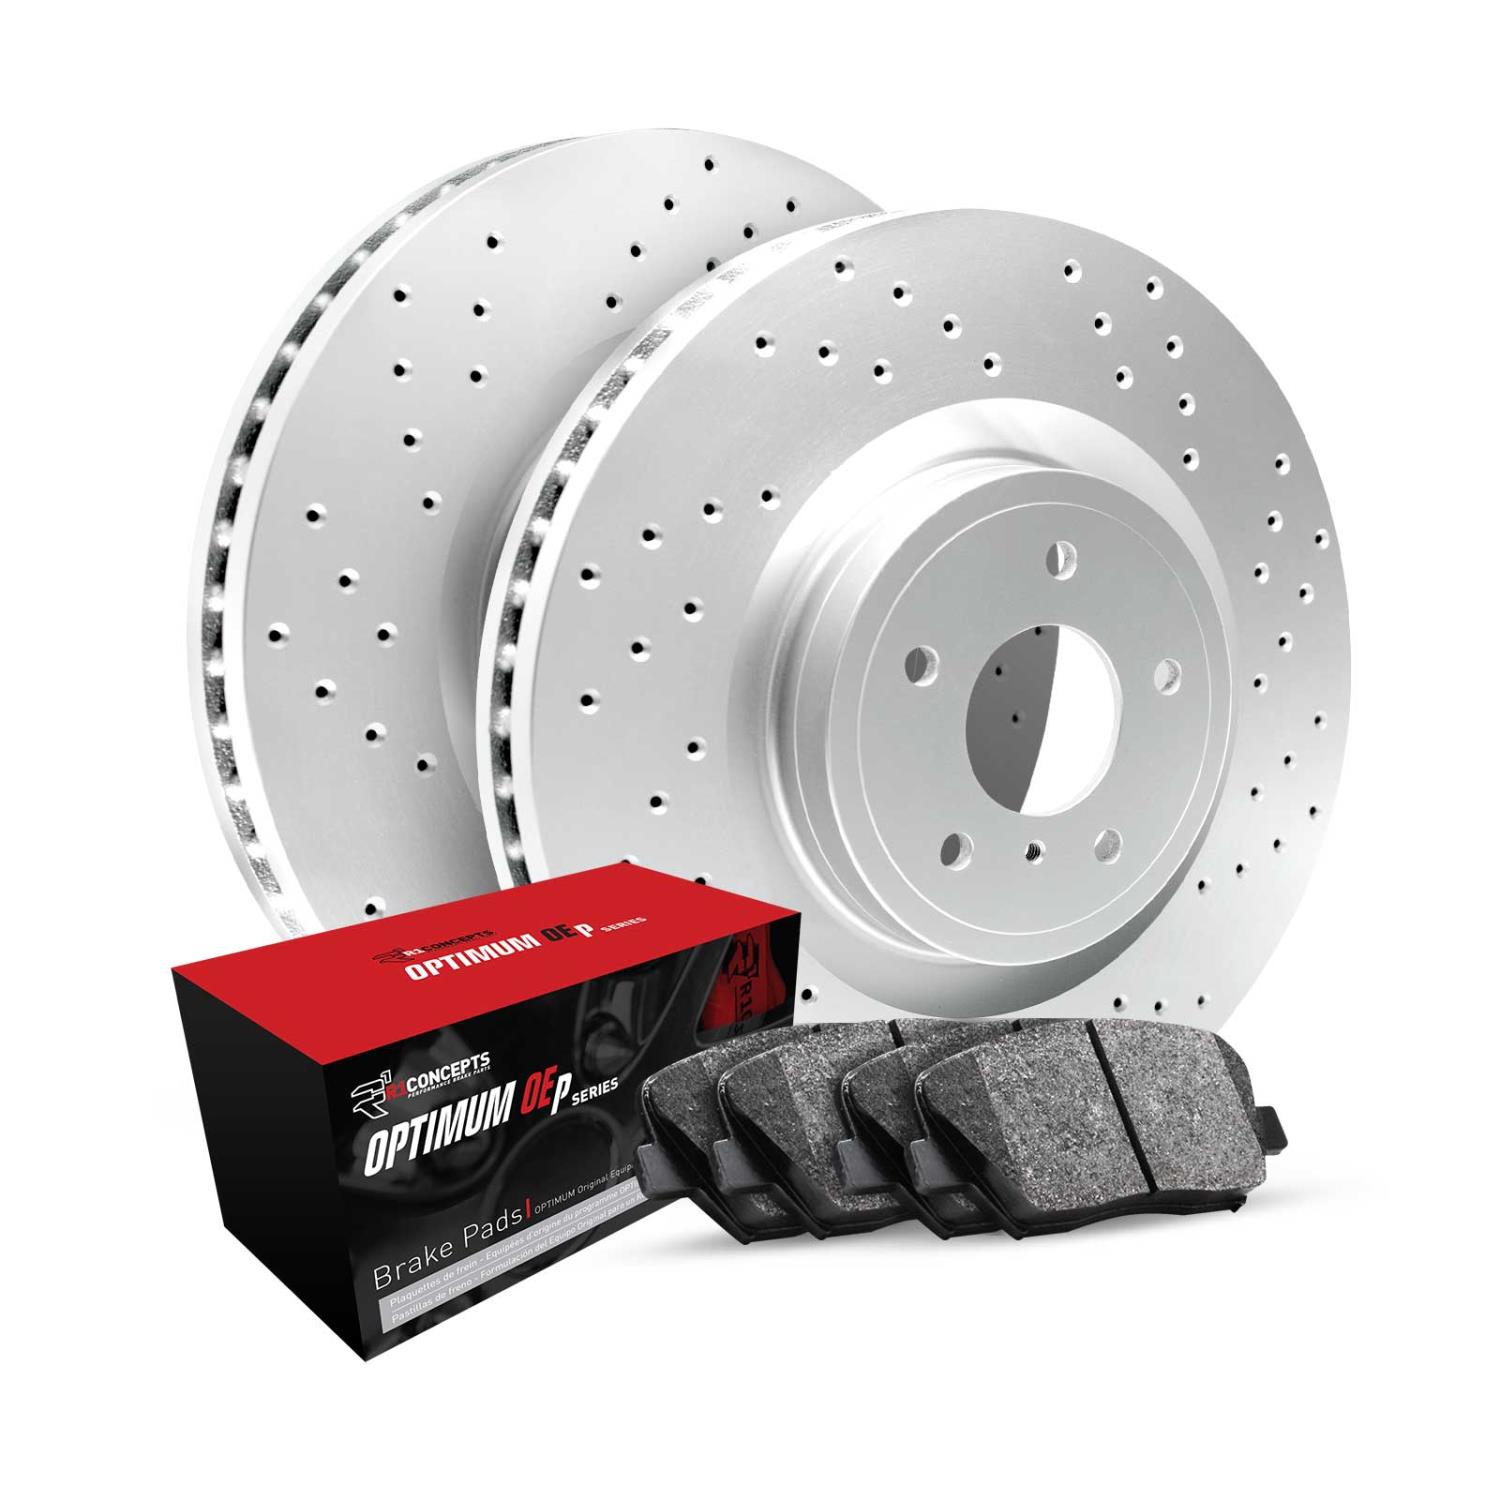 GEO-Carbon Drilled Brake Rotor Set w/Optimum OE Pads, 1996-2015 Fits Multiple Makes/Models, Position: Rear